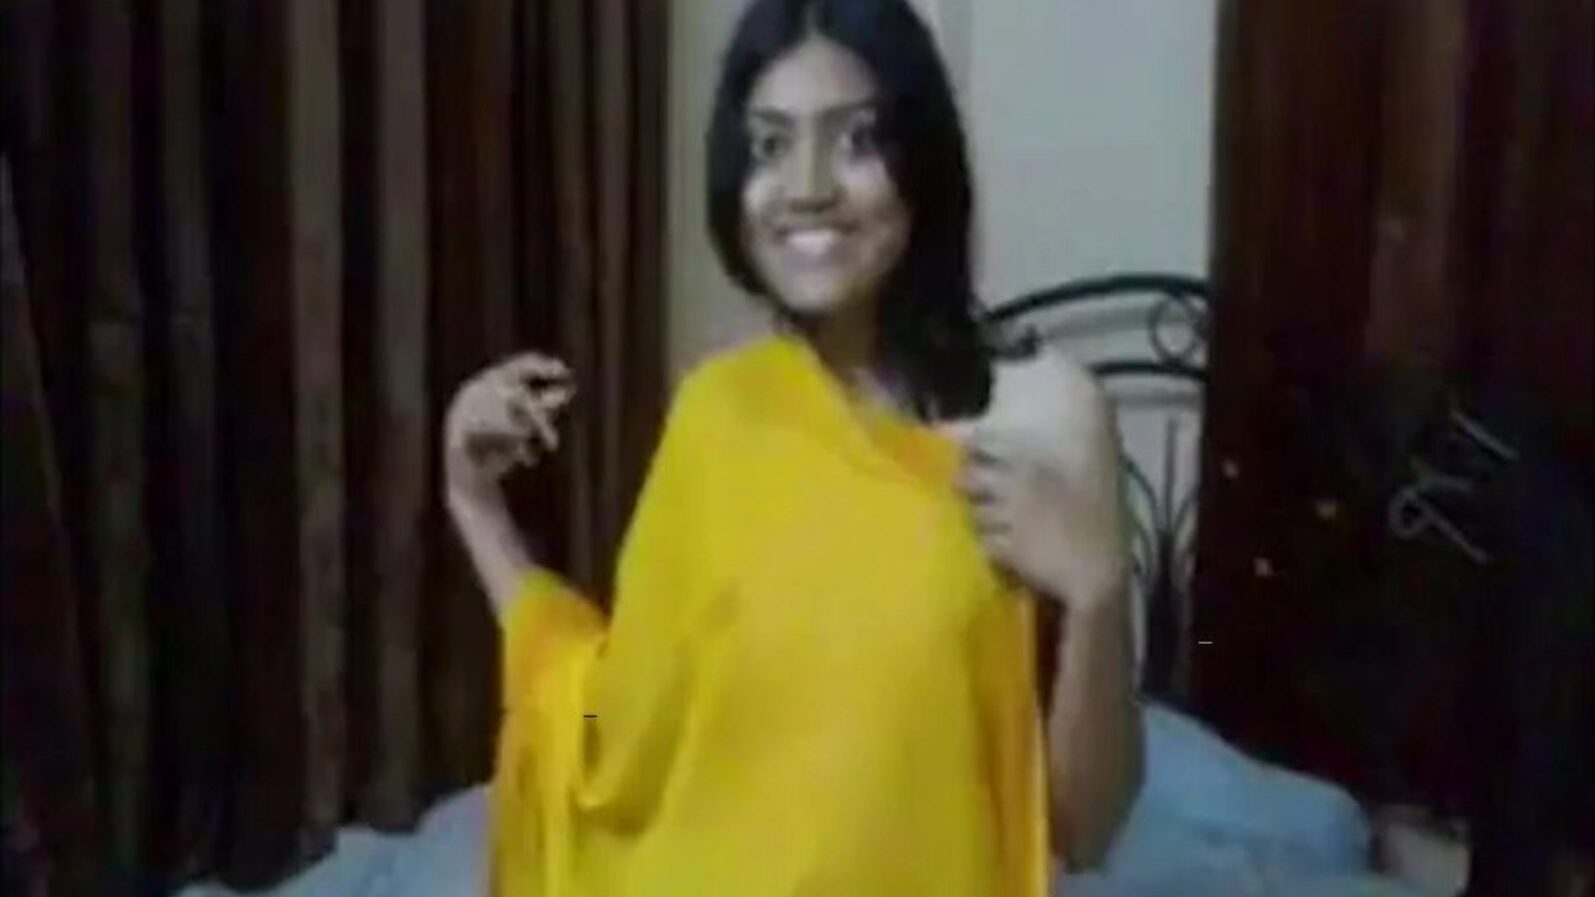 indian college girl fuck by stepbrother, porno 0c: xhamster watch indian college girl fuck by stepbrother film on xhamster, the giant hd orgy tube site with tonnes of free asian fuck online & blowjob porno episodes